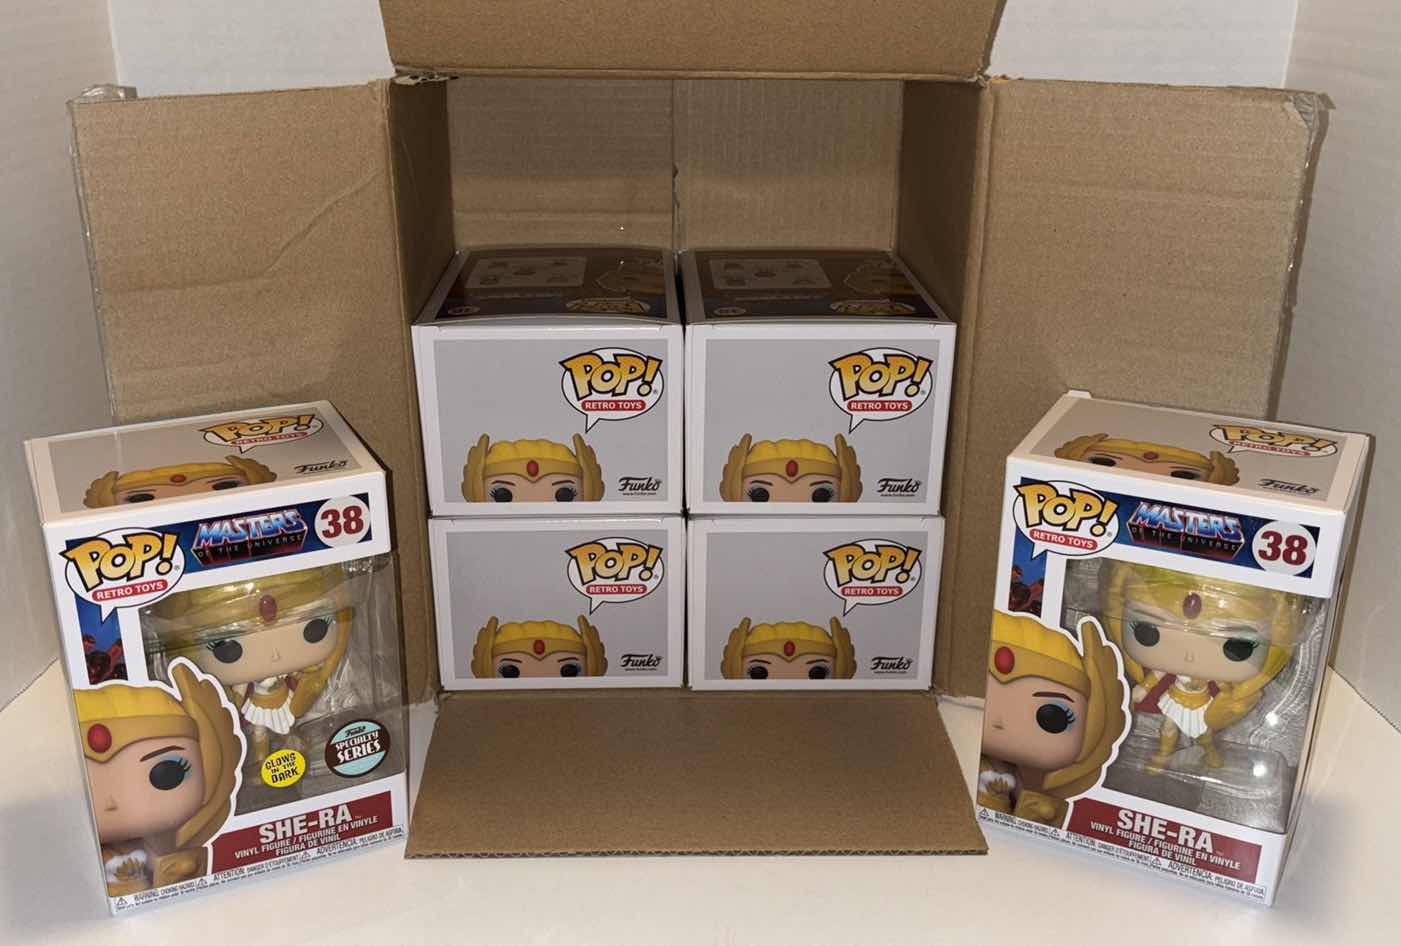 Photo 1 of NEW FUNKO POP! RETRO TOYS VINYL FIGURE 6-PACK, MASTERS OF THE UNIVERSE #38 SHE-RA GLOW IN THE DARK LIMITED EDITION EXCLUSIVE SPECIALTY SERIES (3) & #38 SHE-RA (3)